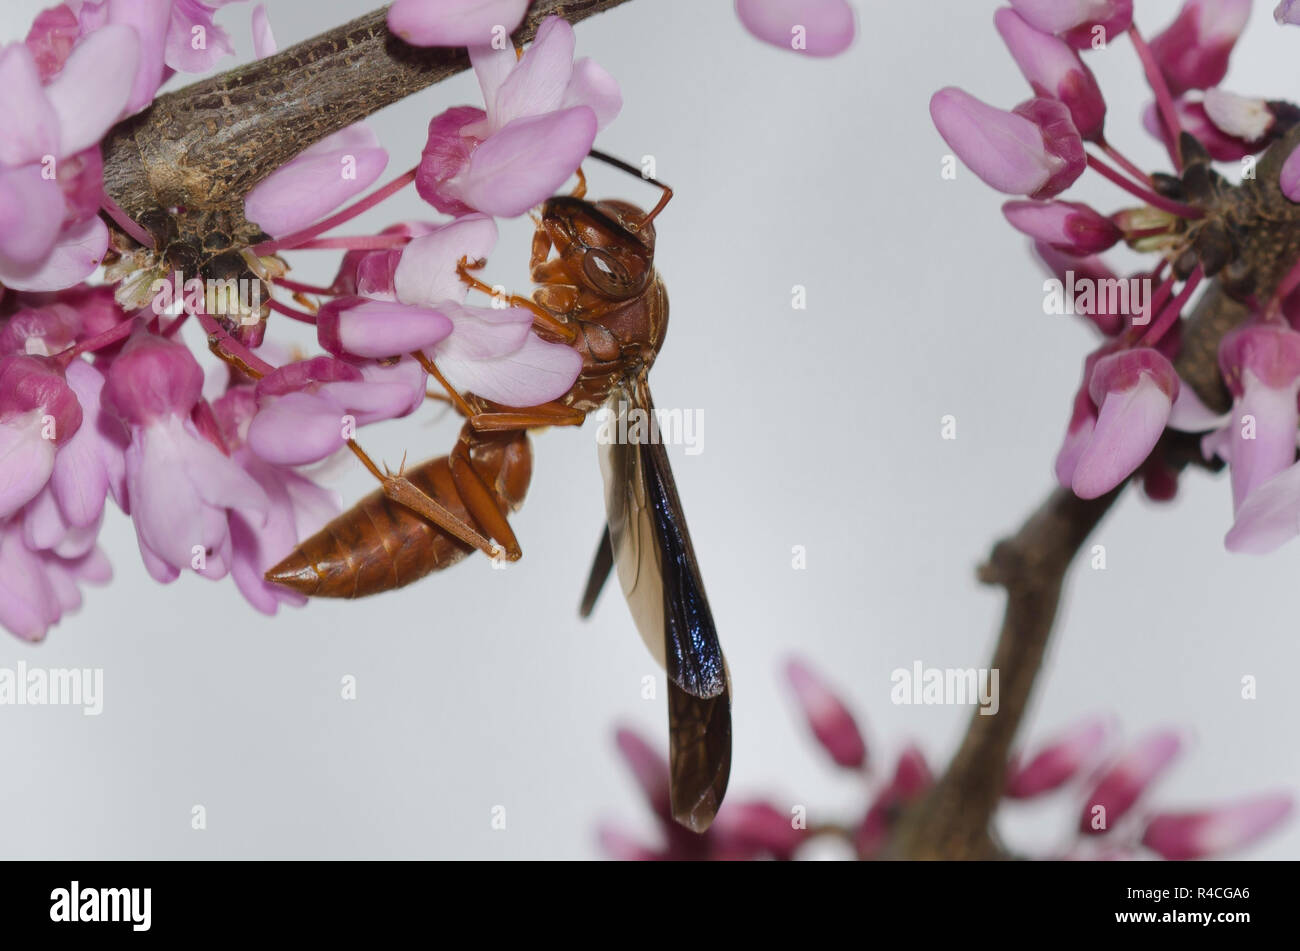 Paper Wasp, Polistes sp., female on Eastern Redbud, Cercis canadensis Stock Photo